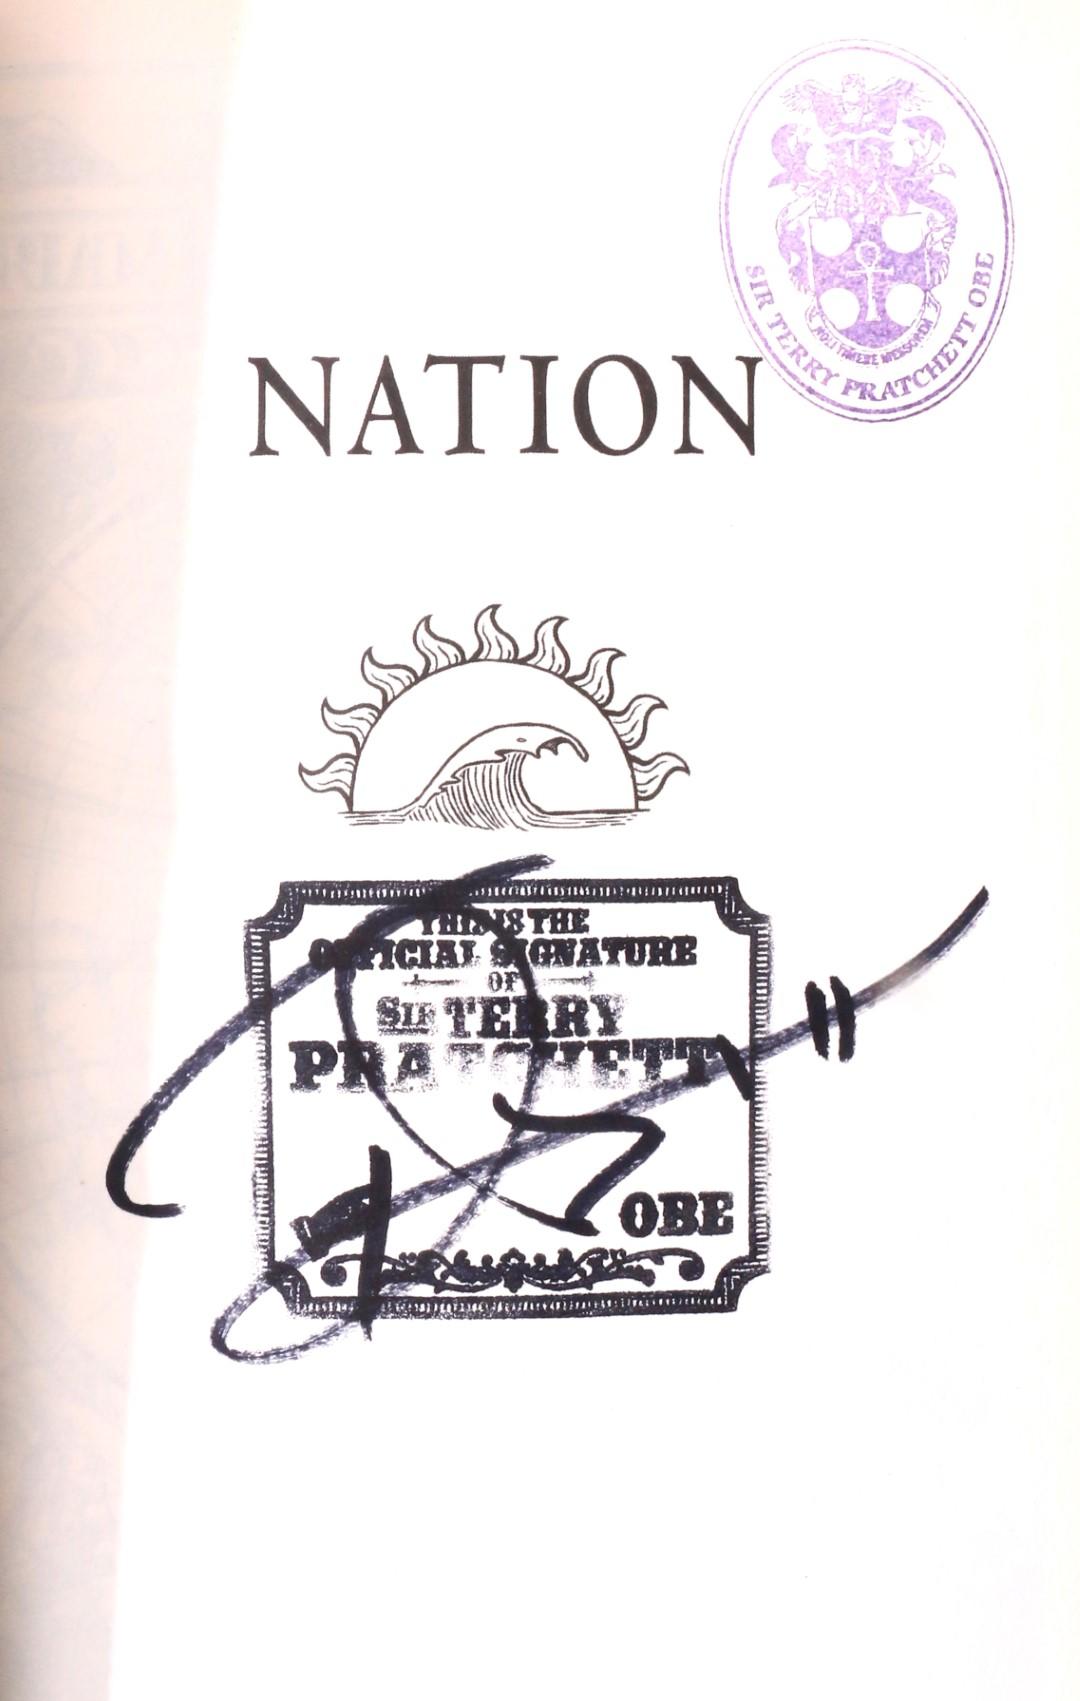 Terry Pratchett - Nation - Doubleday, 2008, Signed Limited Edition.